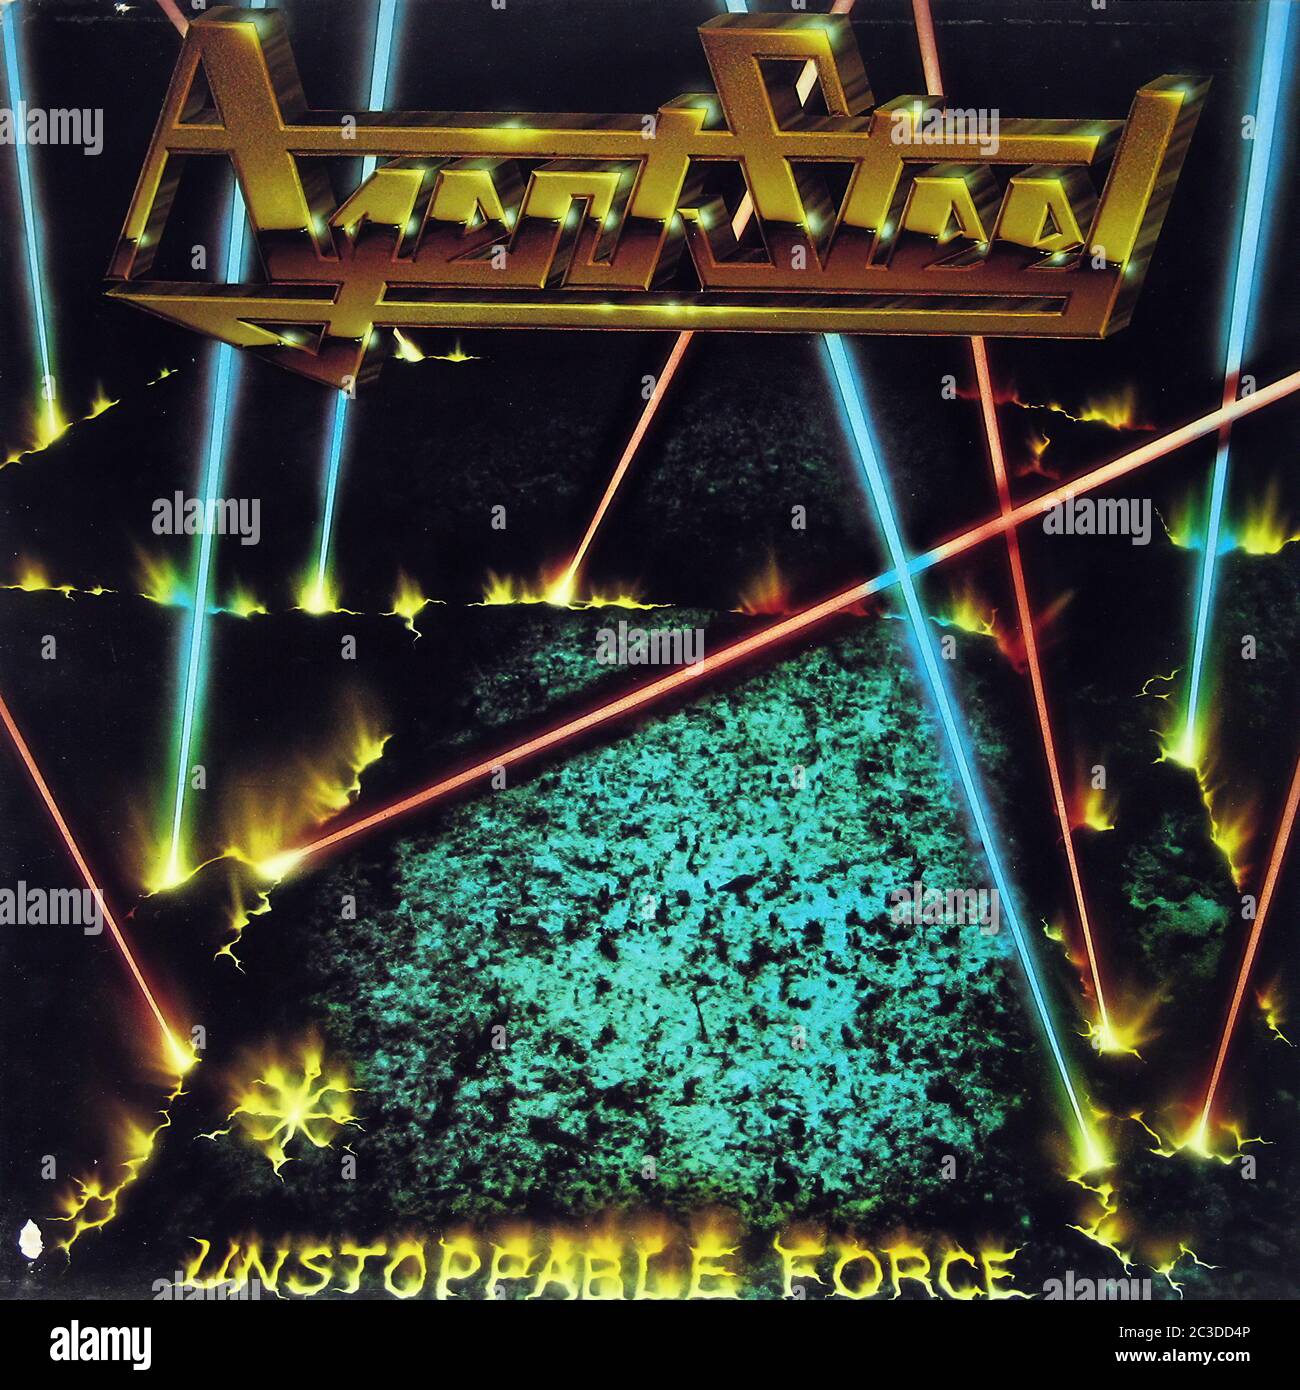 AGENT STEEL UNSTOPPABLE FORCE  - Vintage 12'' vinyl LP Cover Stock Photo